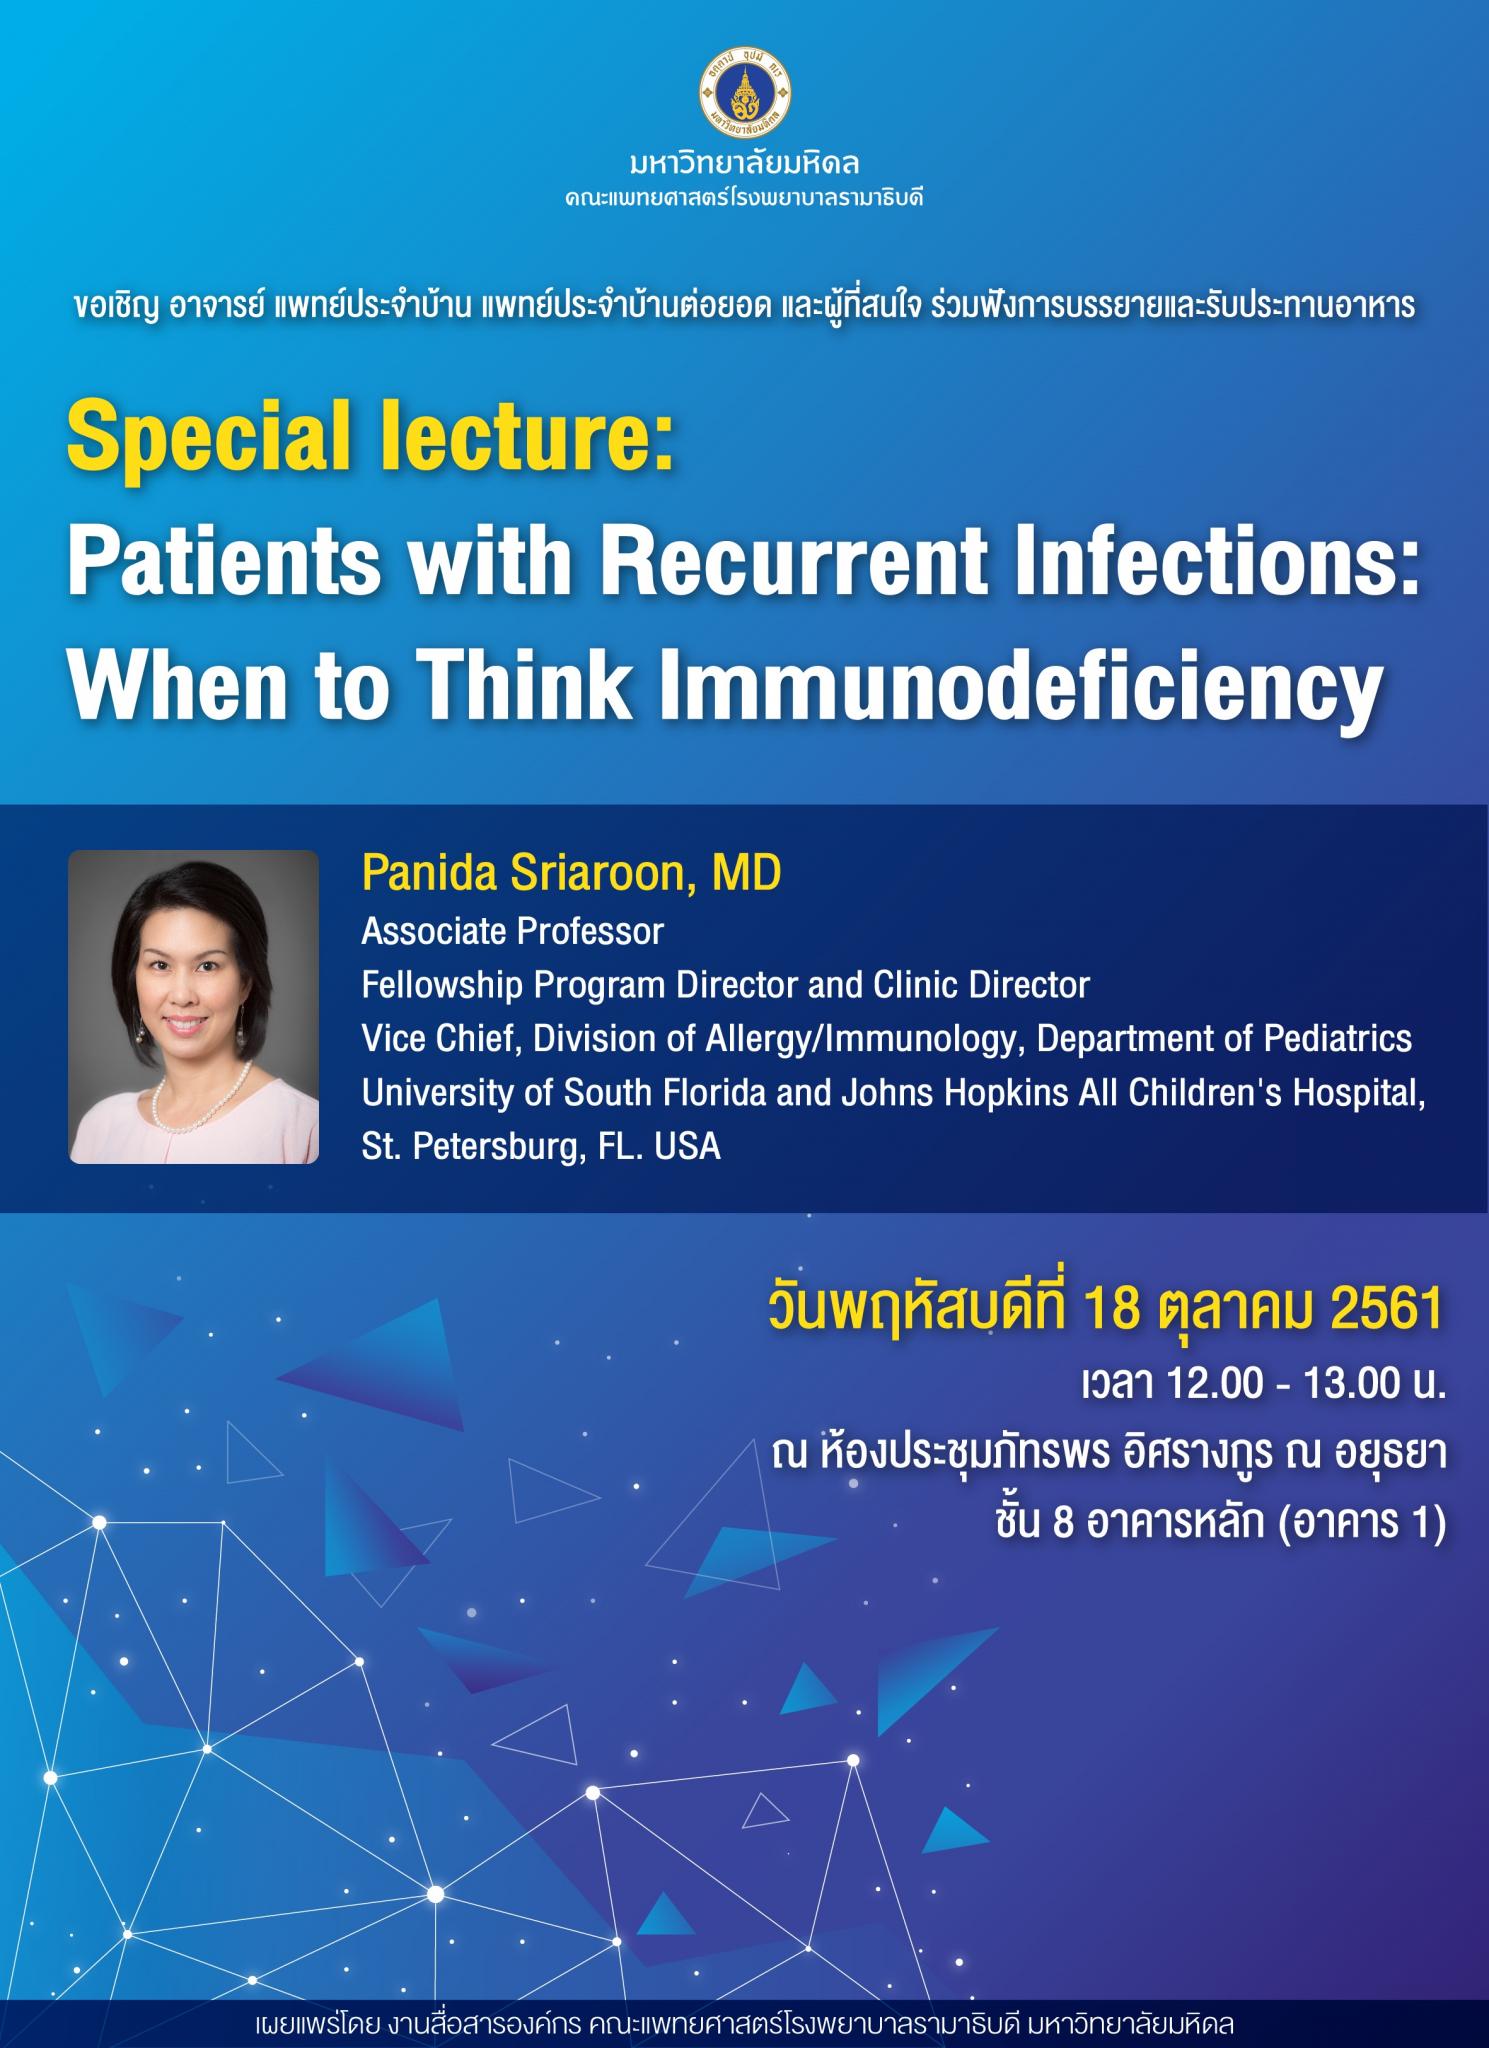 Special lectue: Patients with Recurrent lnfections: When to Think lmmunodeficiency